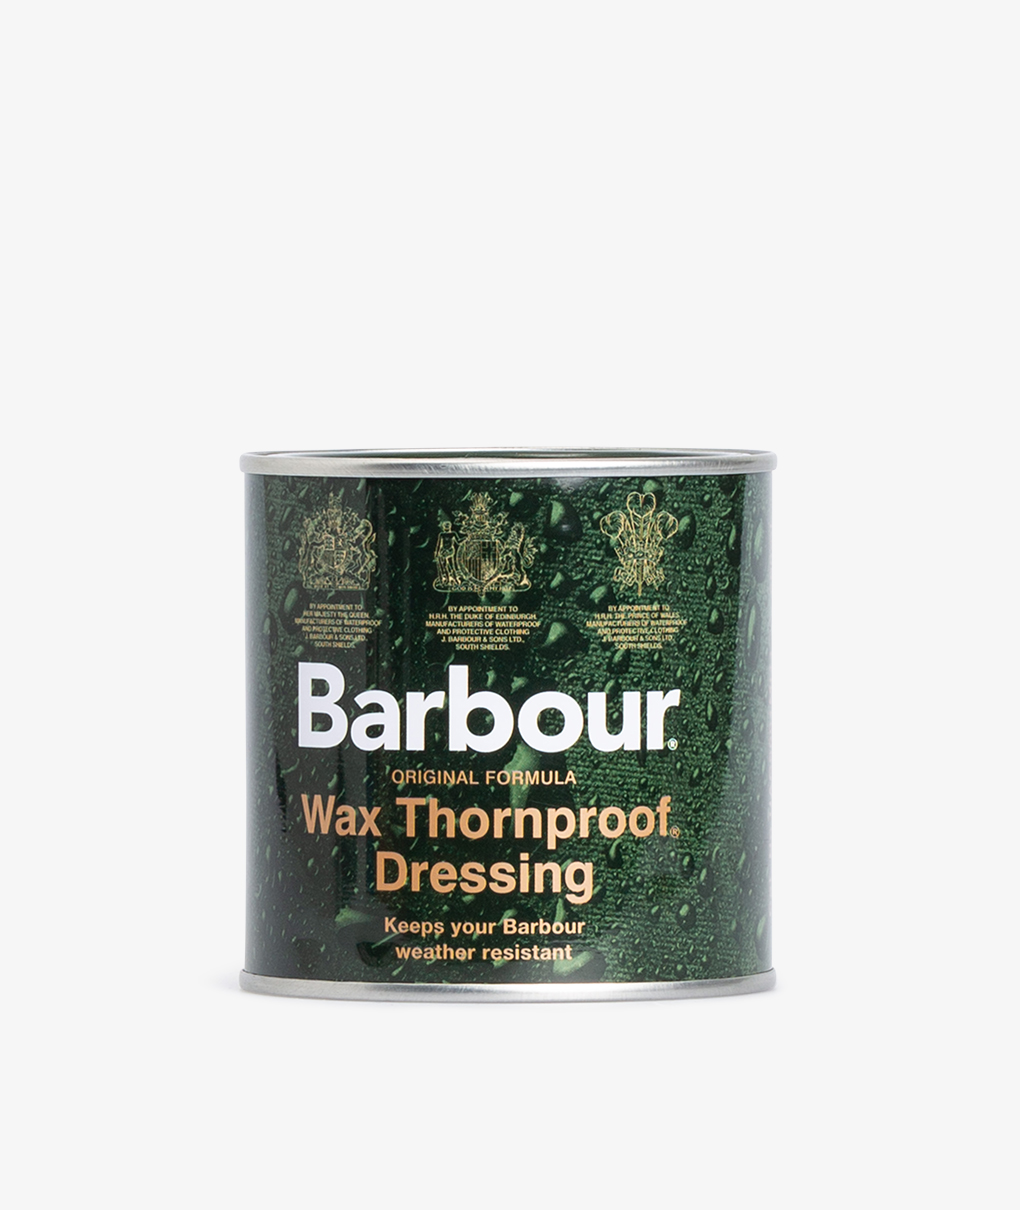 Norse Store - Thornproof Dressing by 